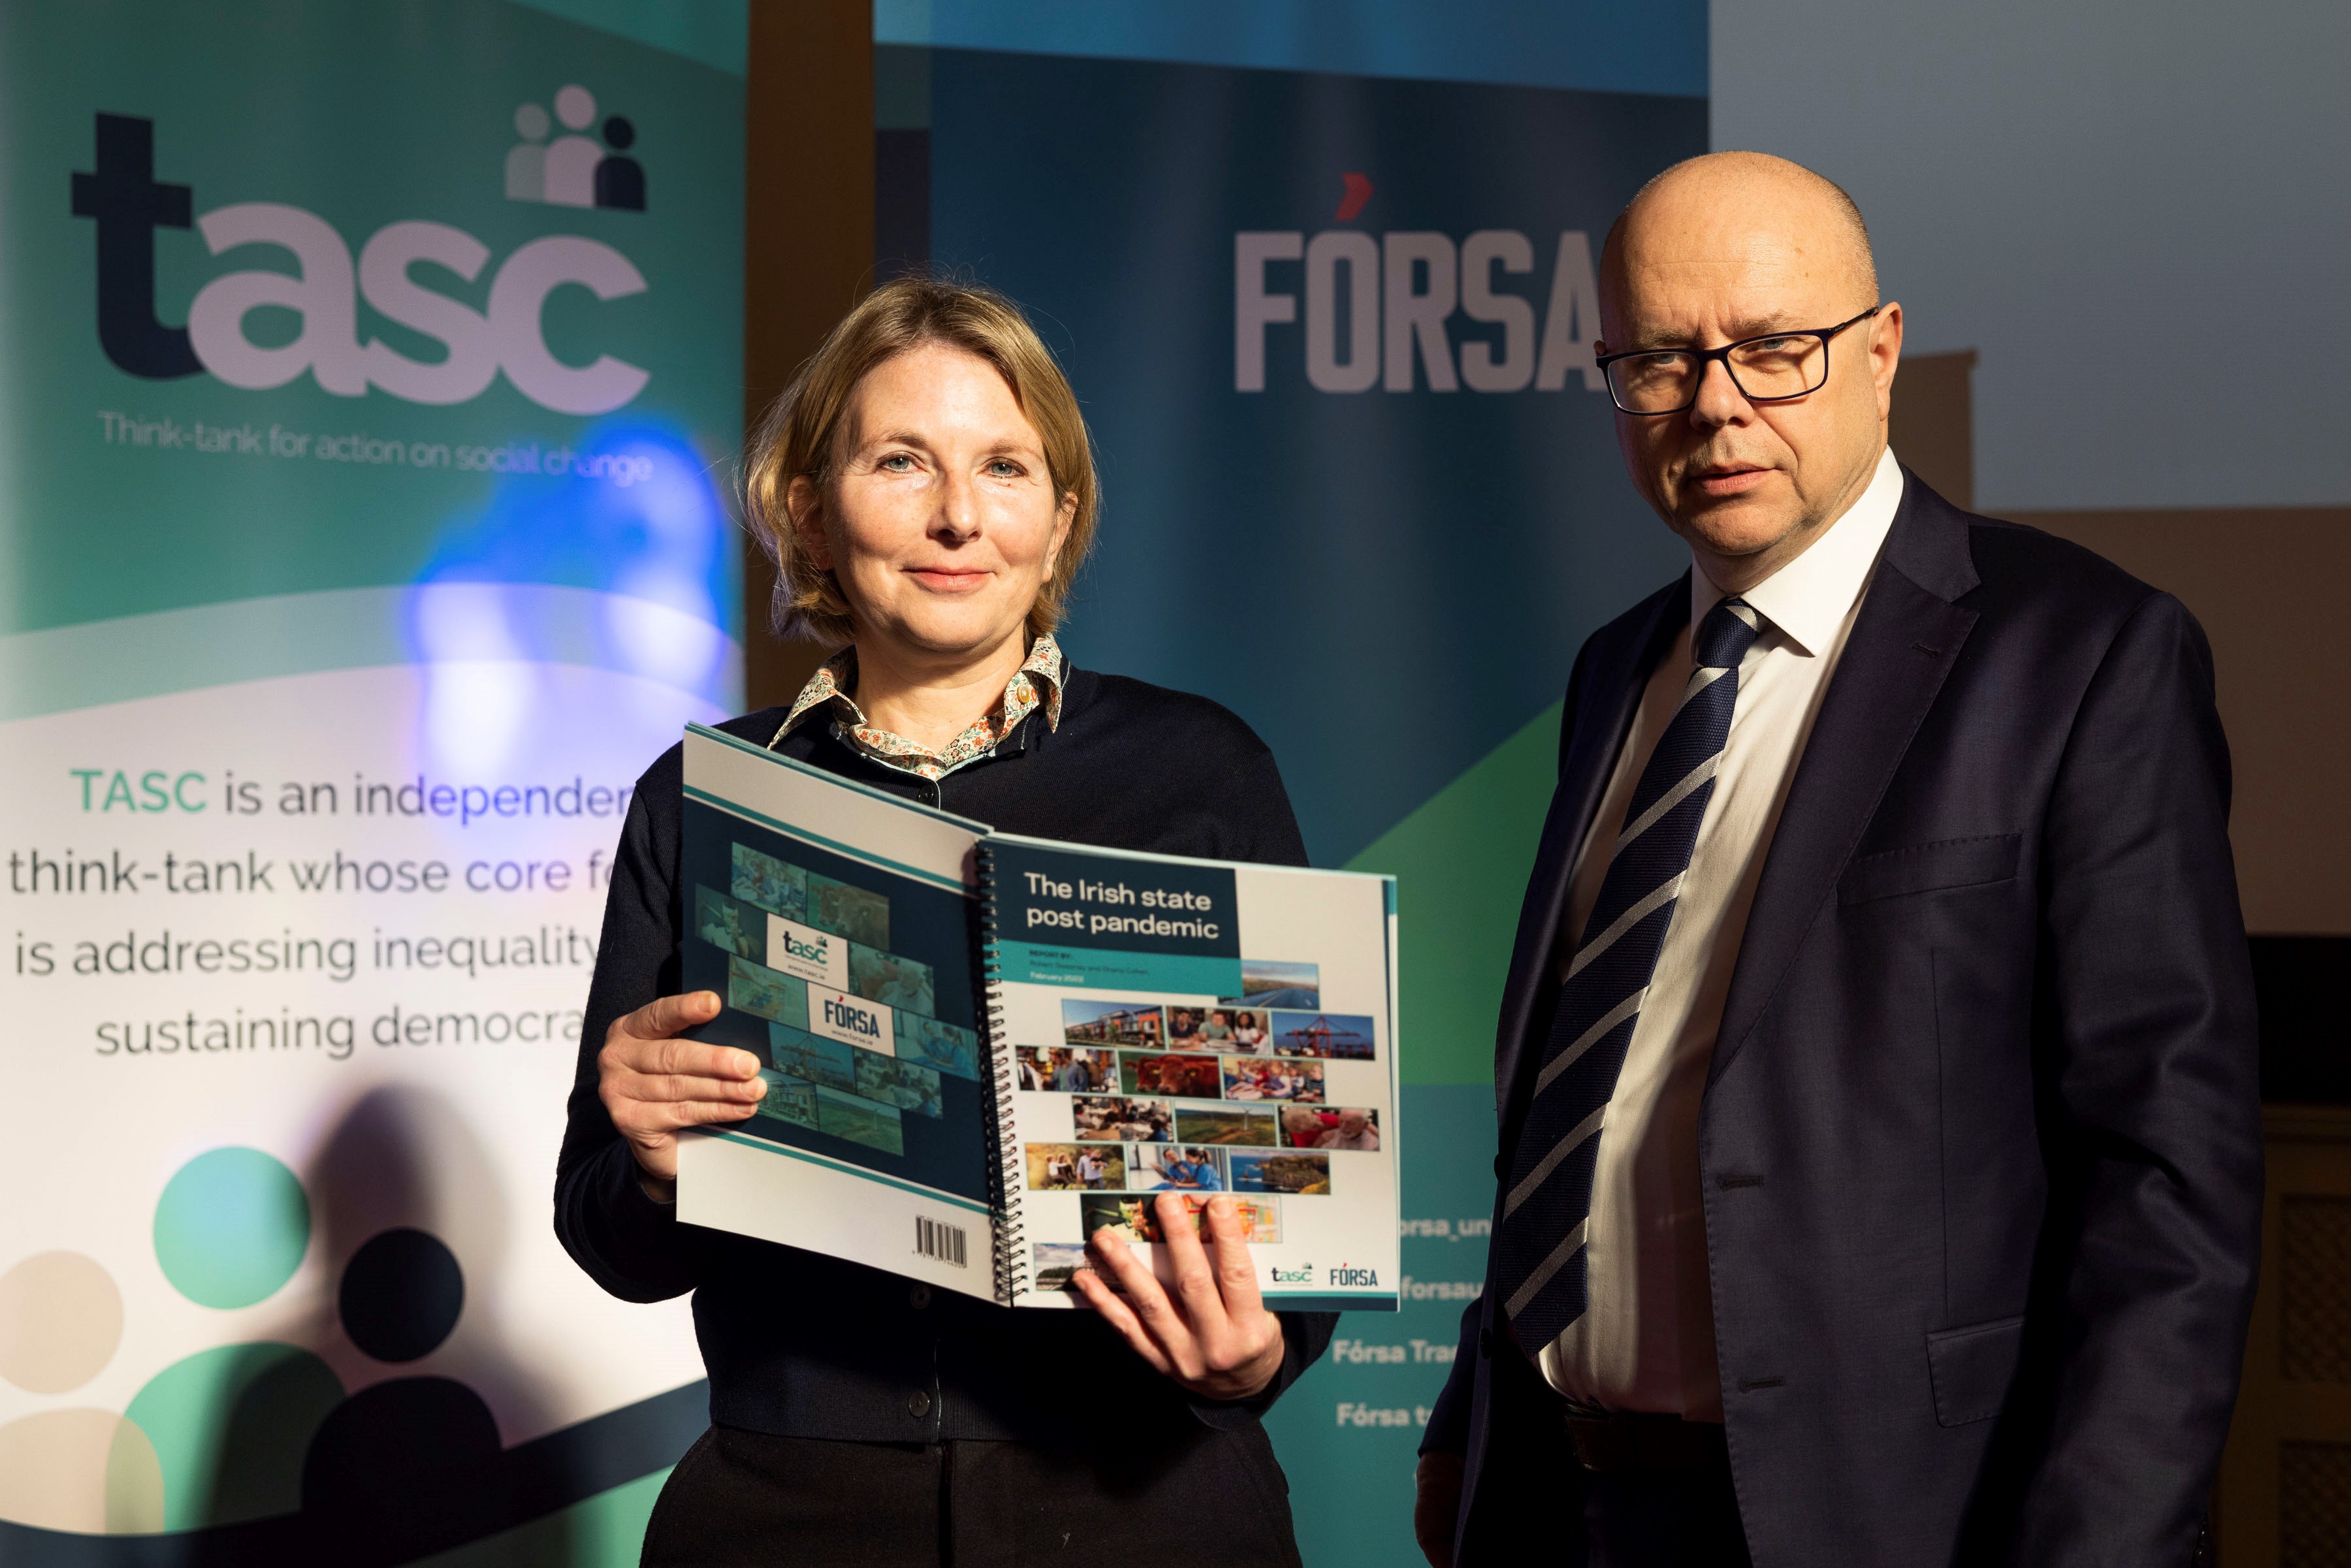 Director at TASC Dr Shana Cohen and Fórsa General Secretary Kevin Callinan at the launch of the report last week.